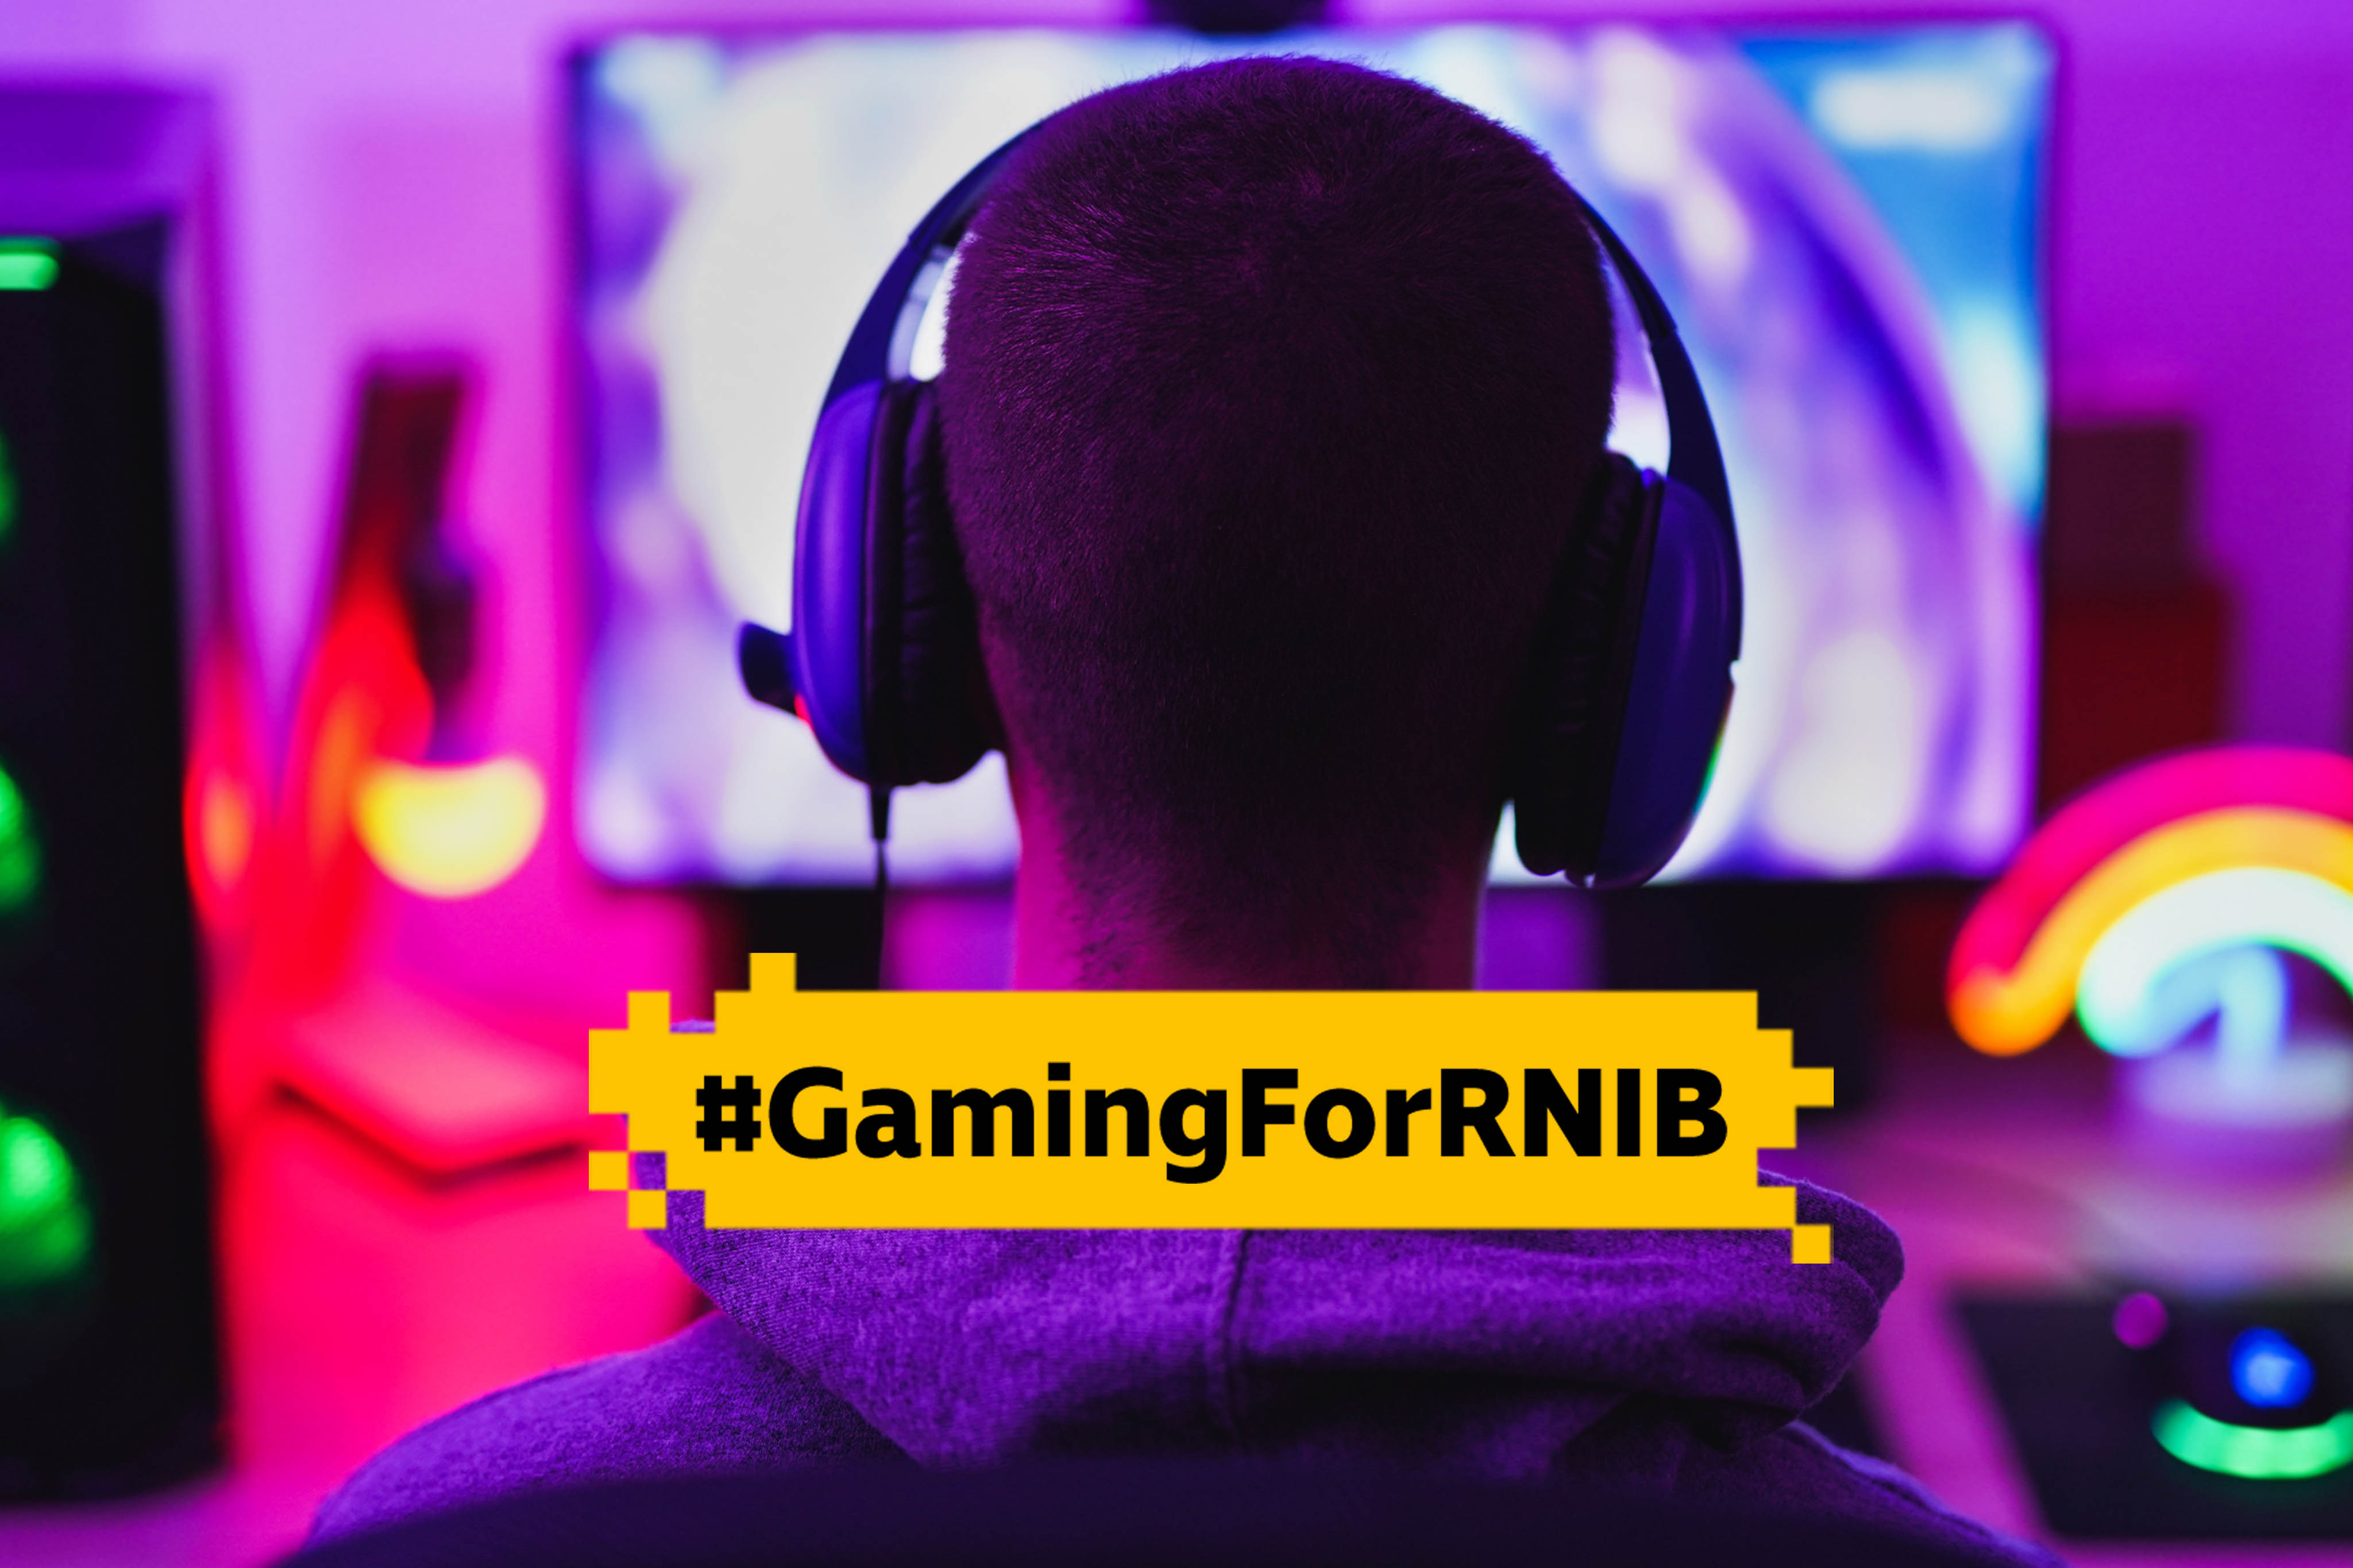 <img src="Gaming For RNIB.jpg" alt="The Royal National Institute of Blind People New Campaign - Gaming For RNIB">